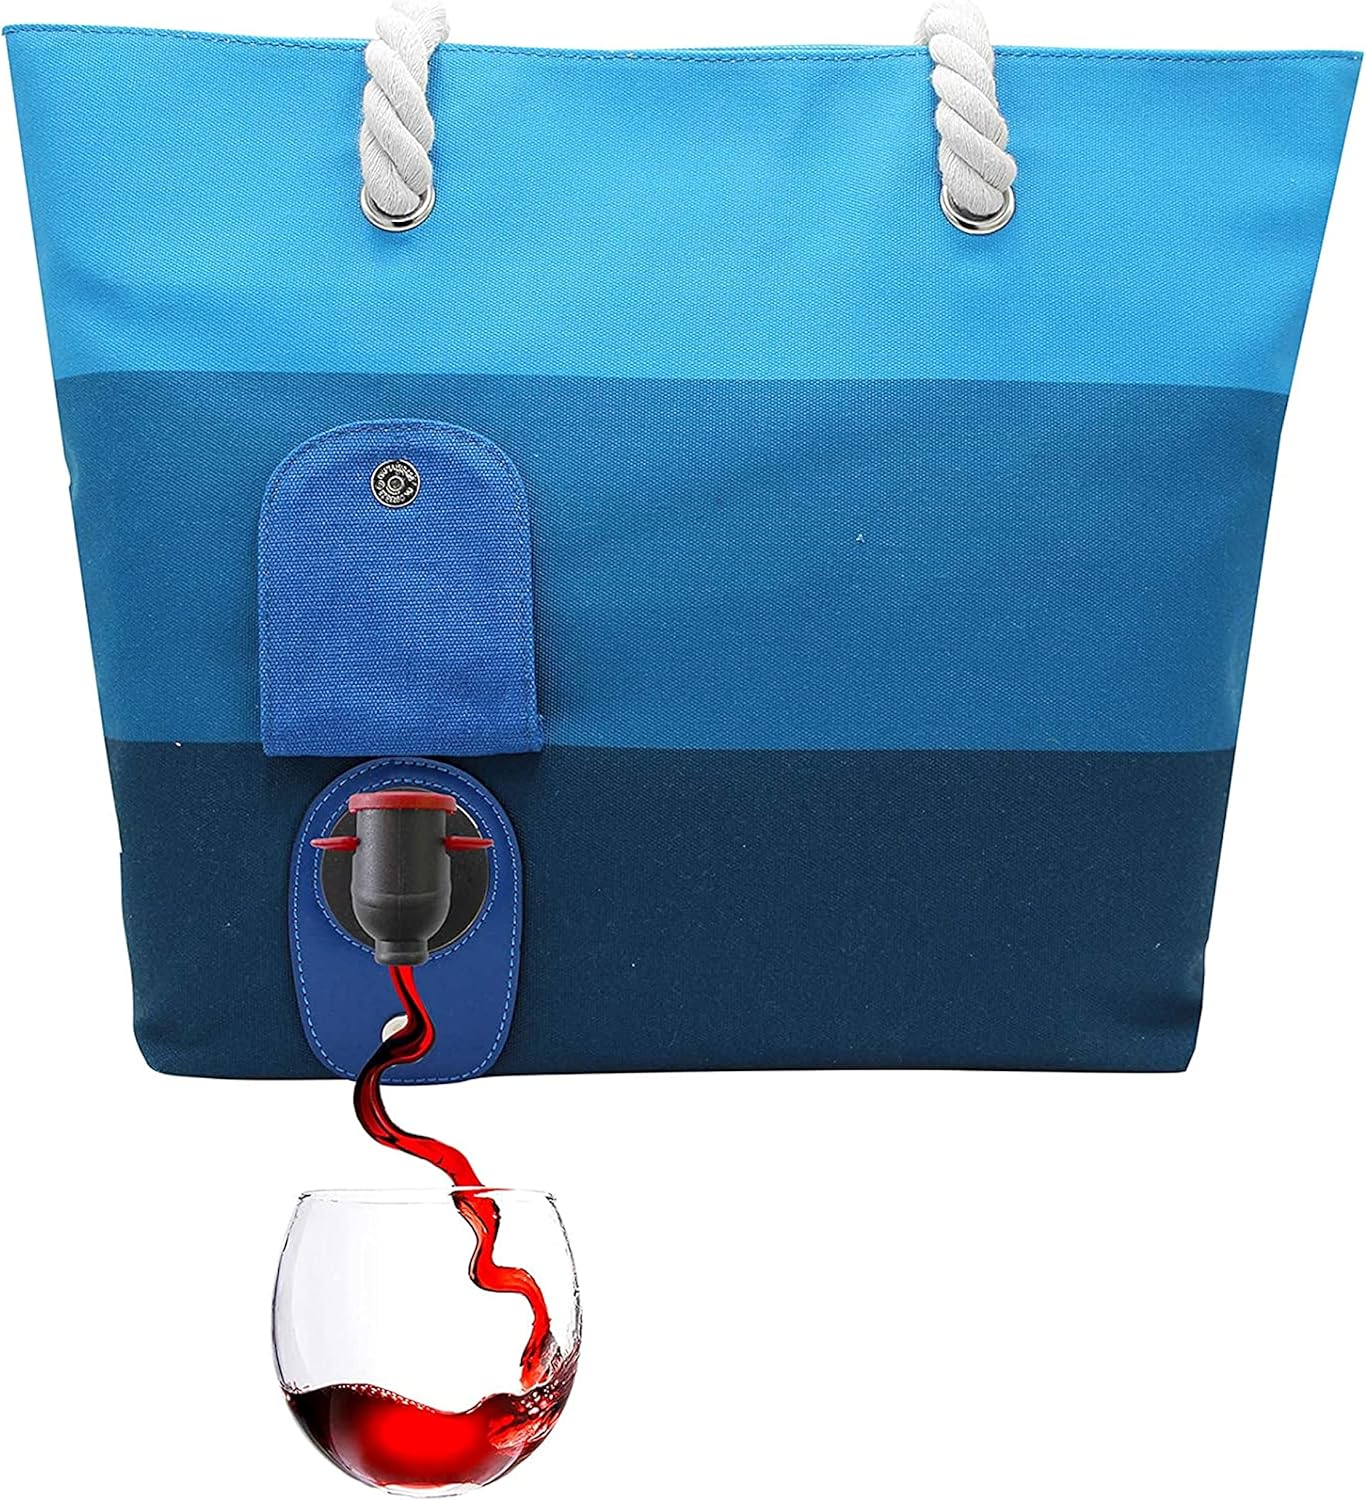 Tote Beach Bag - Canvas Wine Purse with Hidden Spout and Dispenser Flask for Wine Lovers That Holds and Pours 2 Bottles of Wine! Traveling, Concerts, Bachelorette Party - Sangria